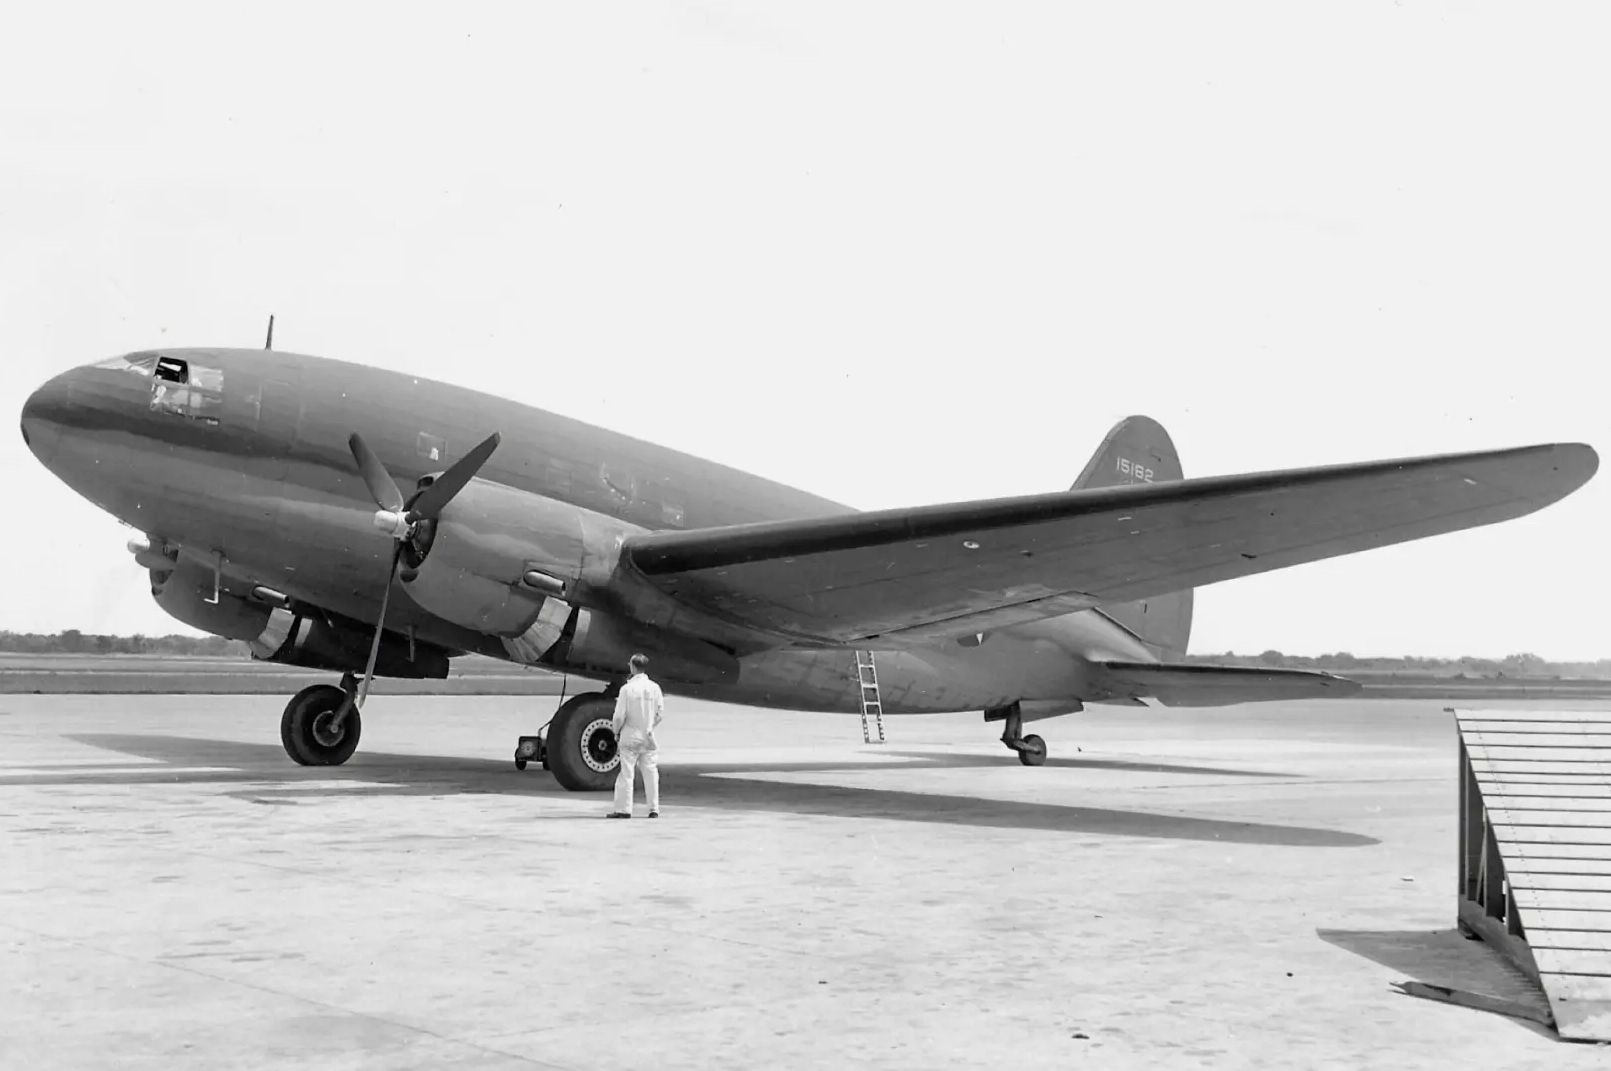 A Northwest Airlines Curtiss C-46 on an airport apron.